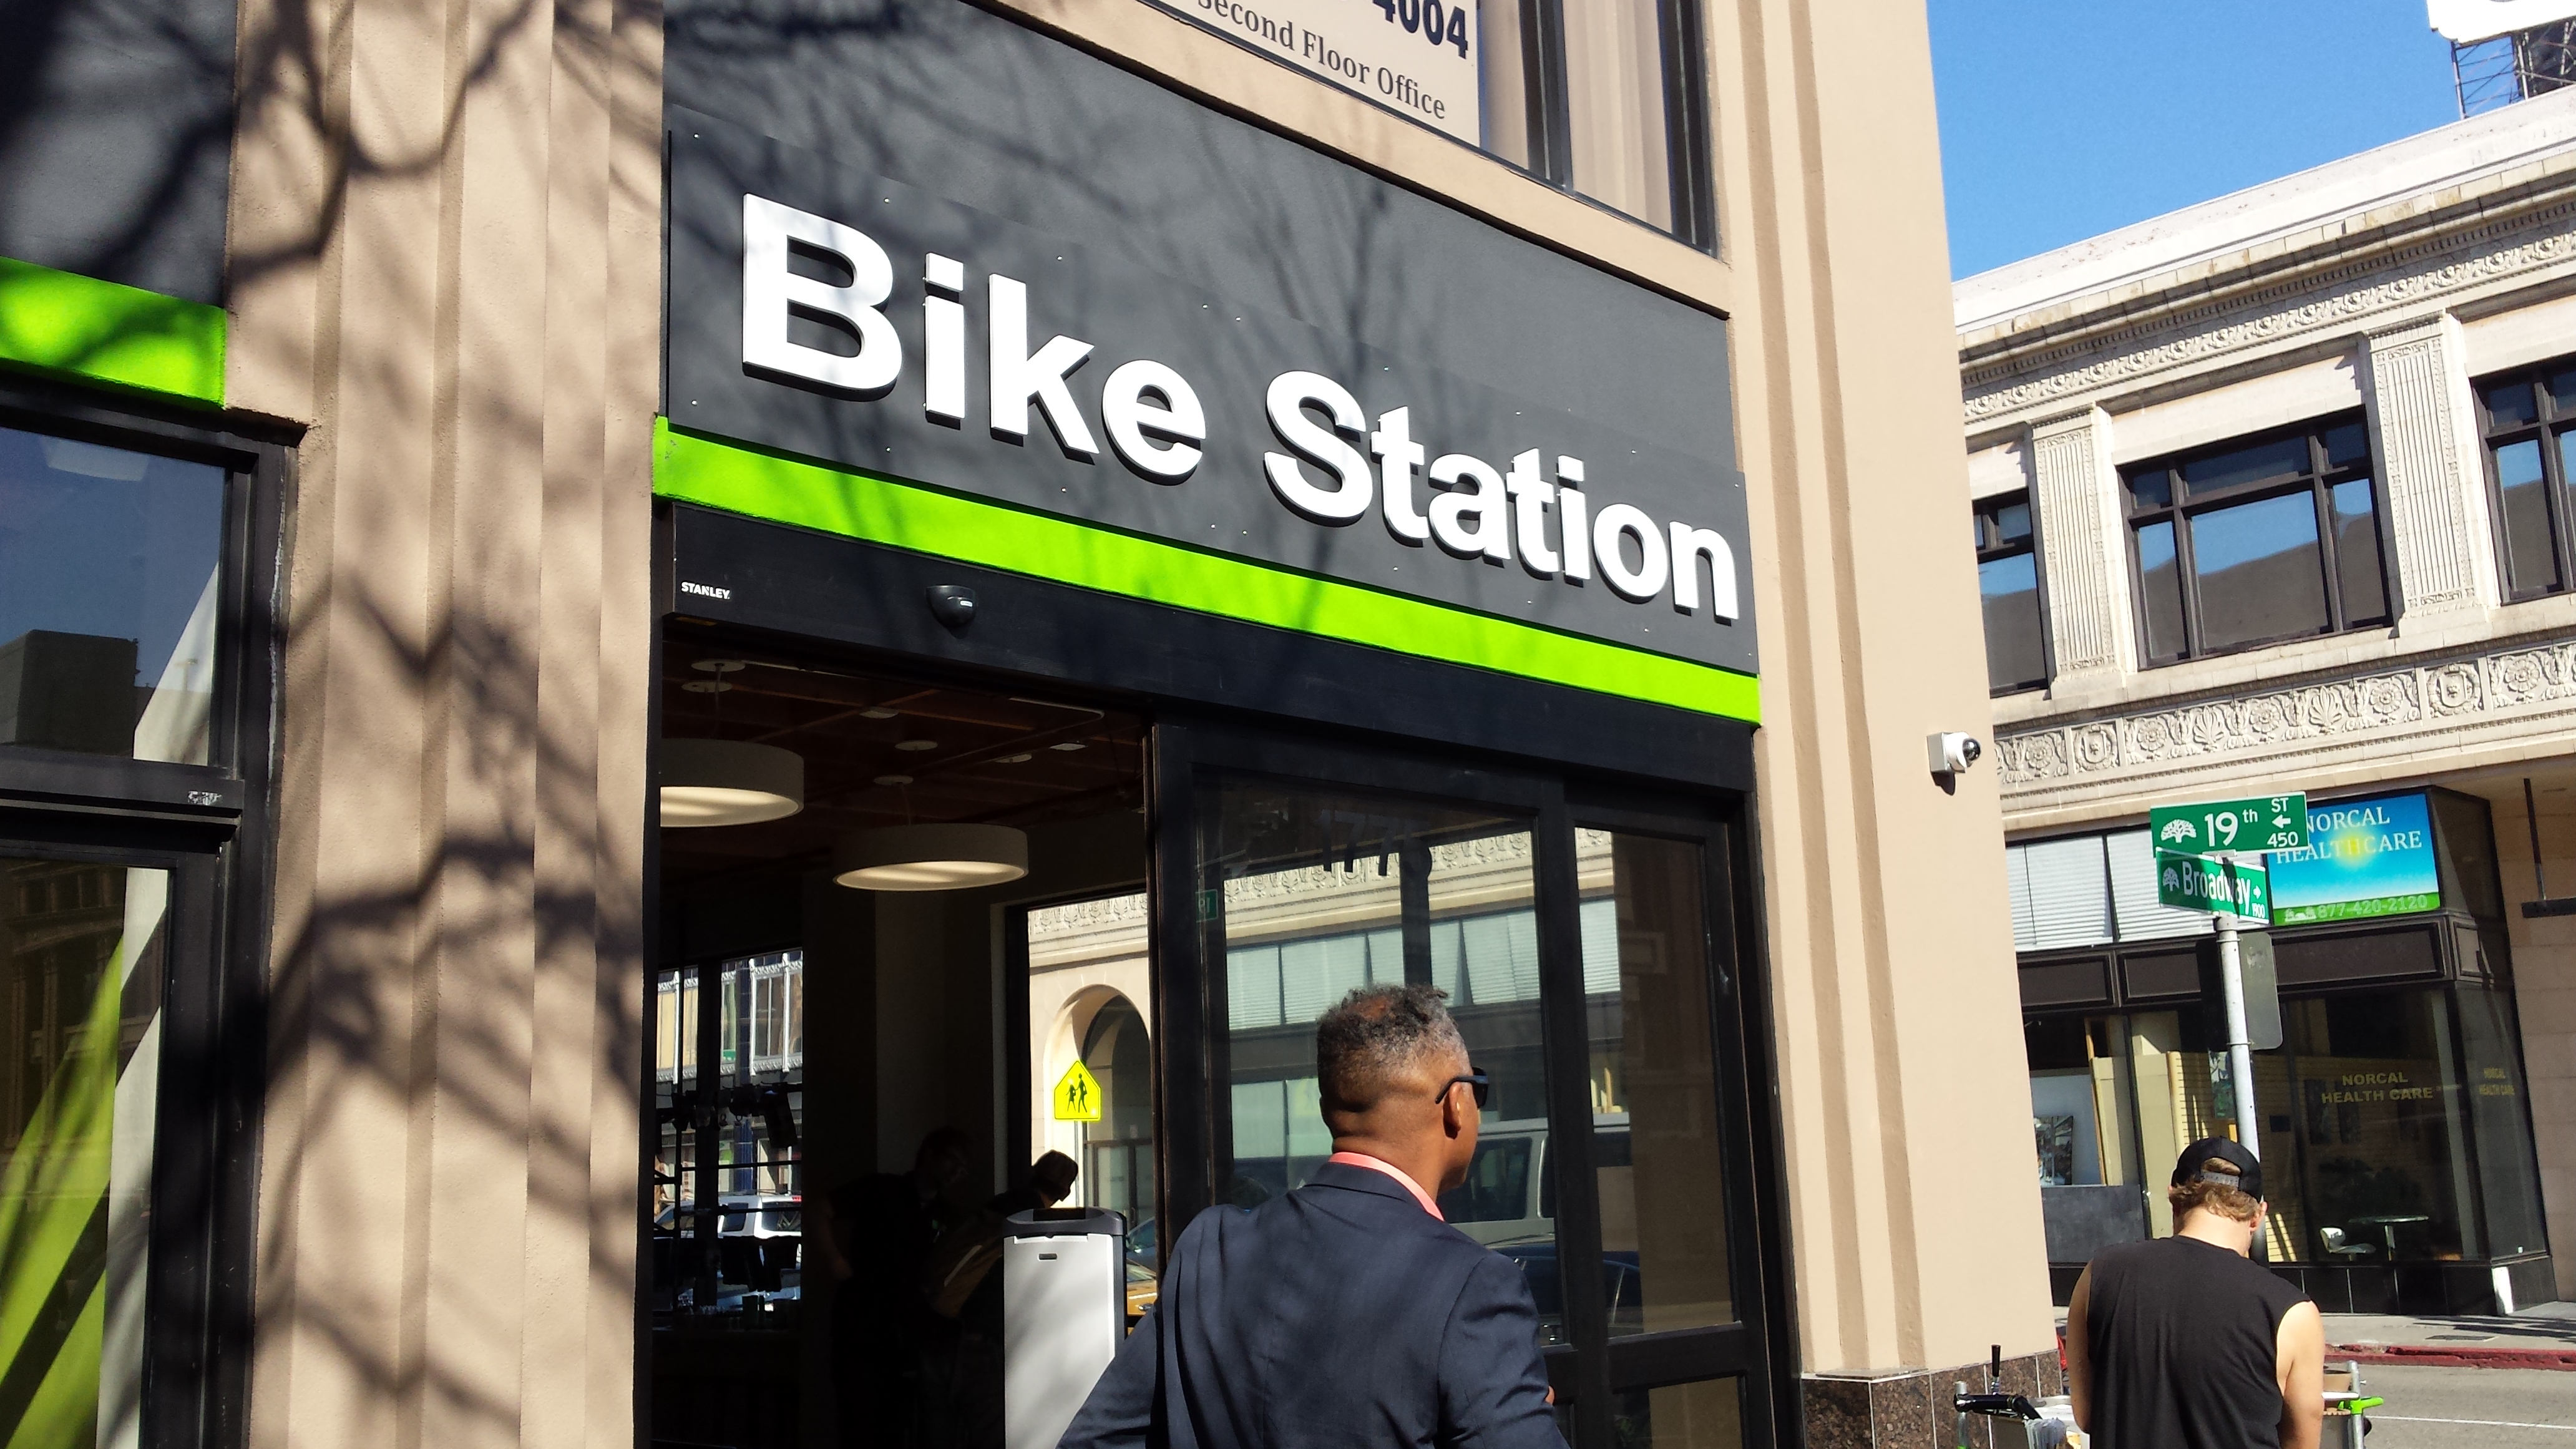 BART Bike Station in Oakland. (Photo by Curtis Kim) 